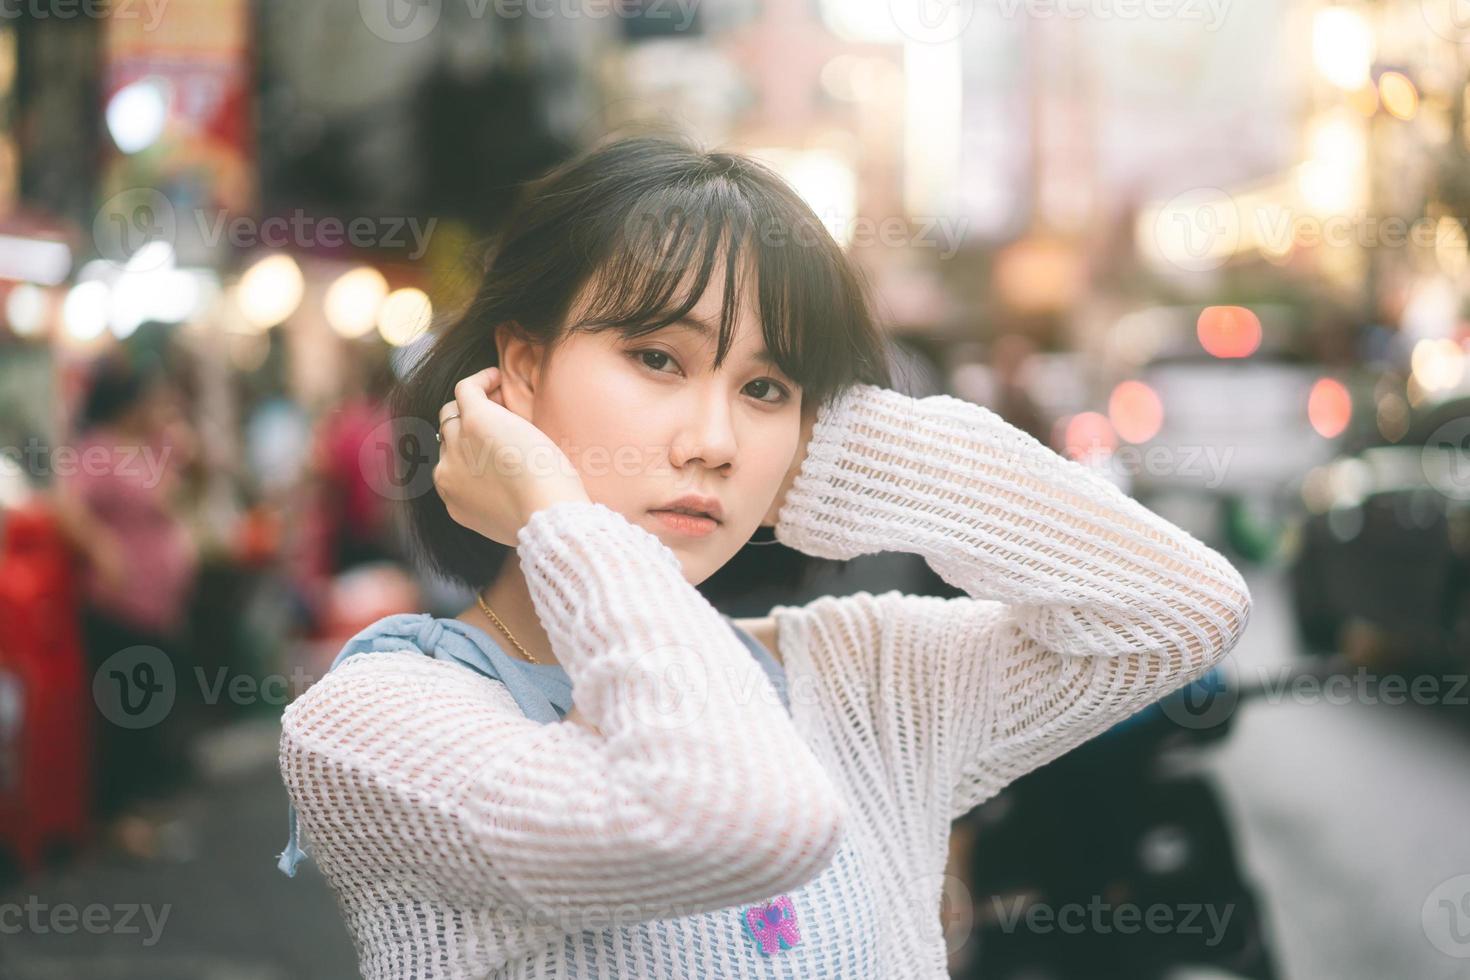 Portrait of young adult asian woman with 80s style japanese fashion at city outdoor photo